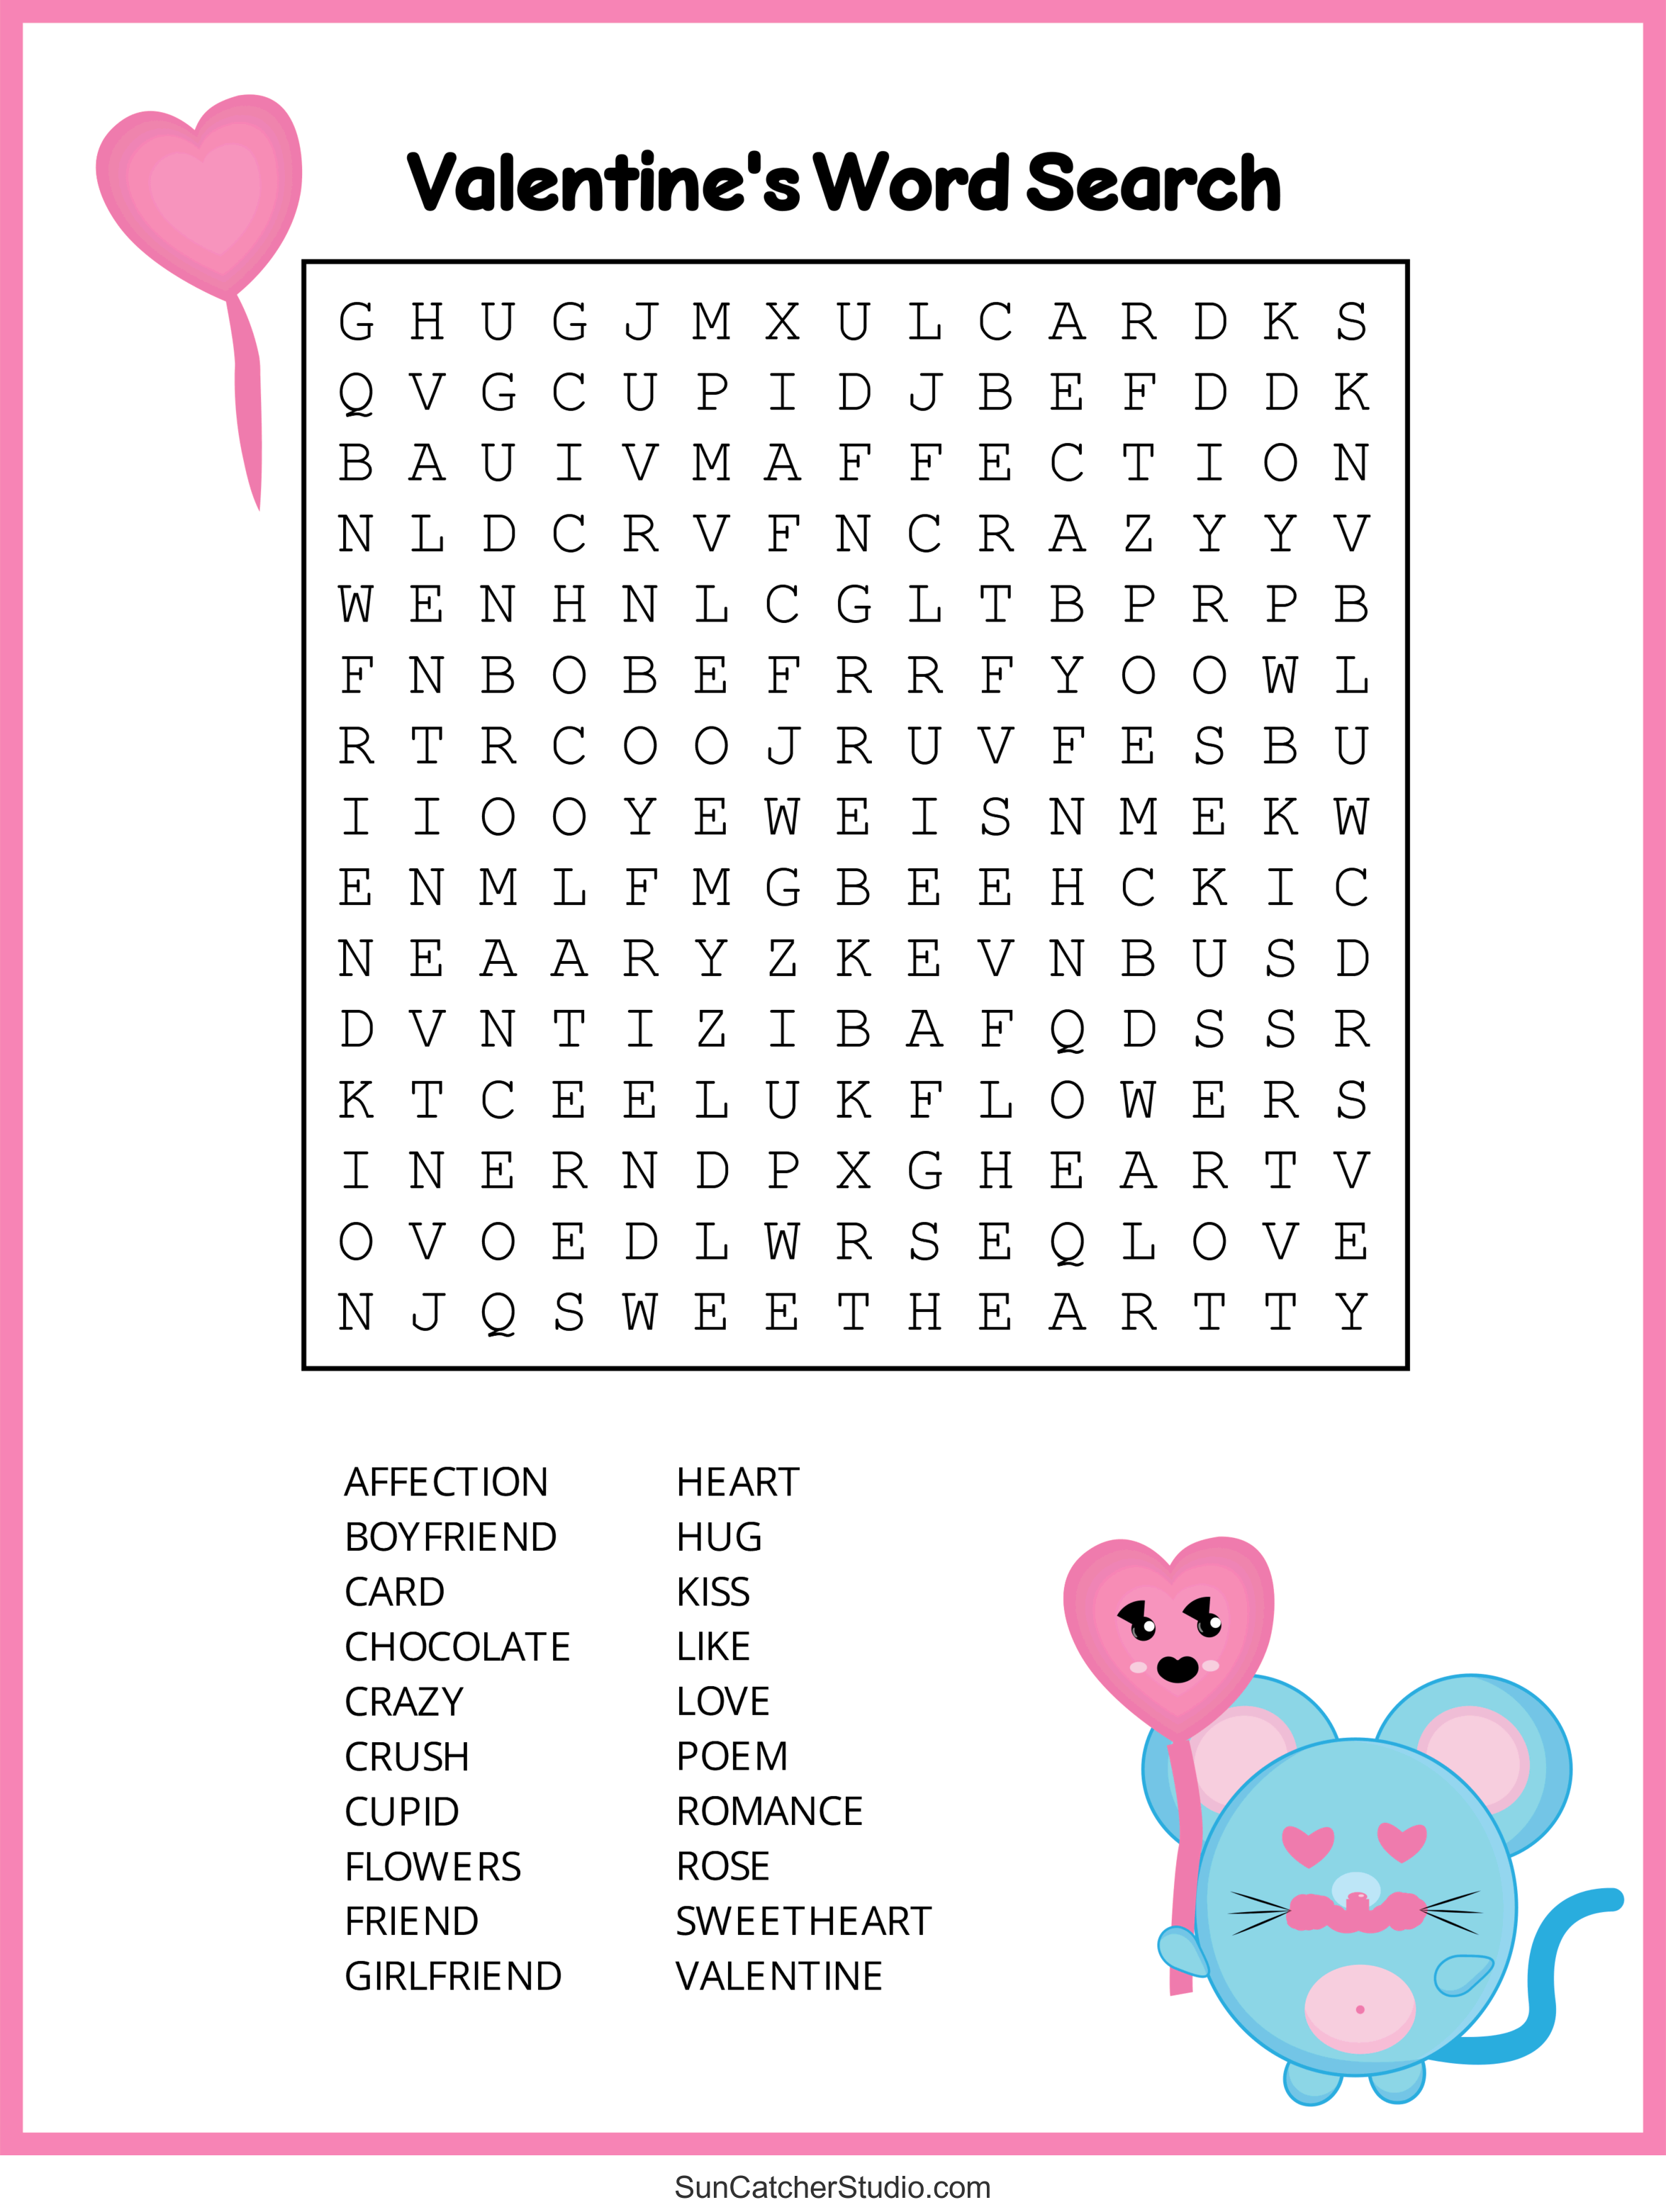 Valentine s Day Word Search Free Printable PDF Puzzles DIY Projects Patterns Monograms Designs Templates